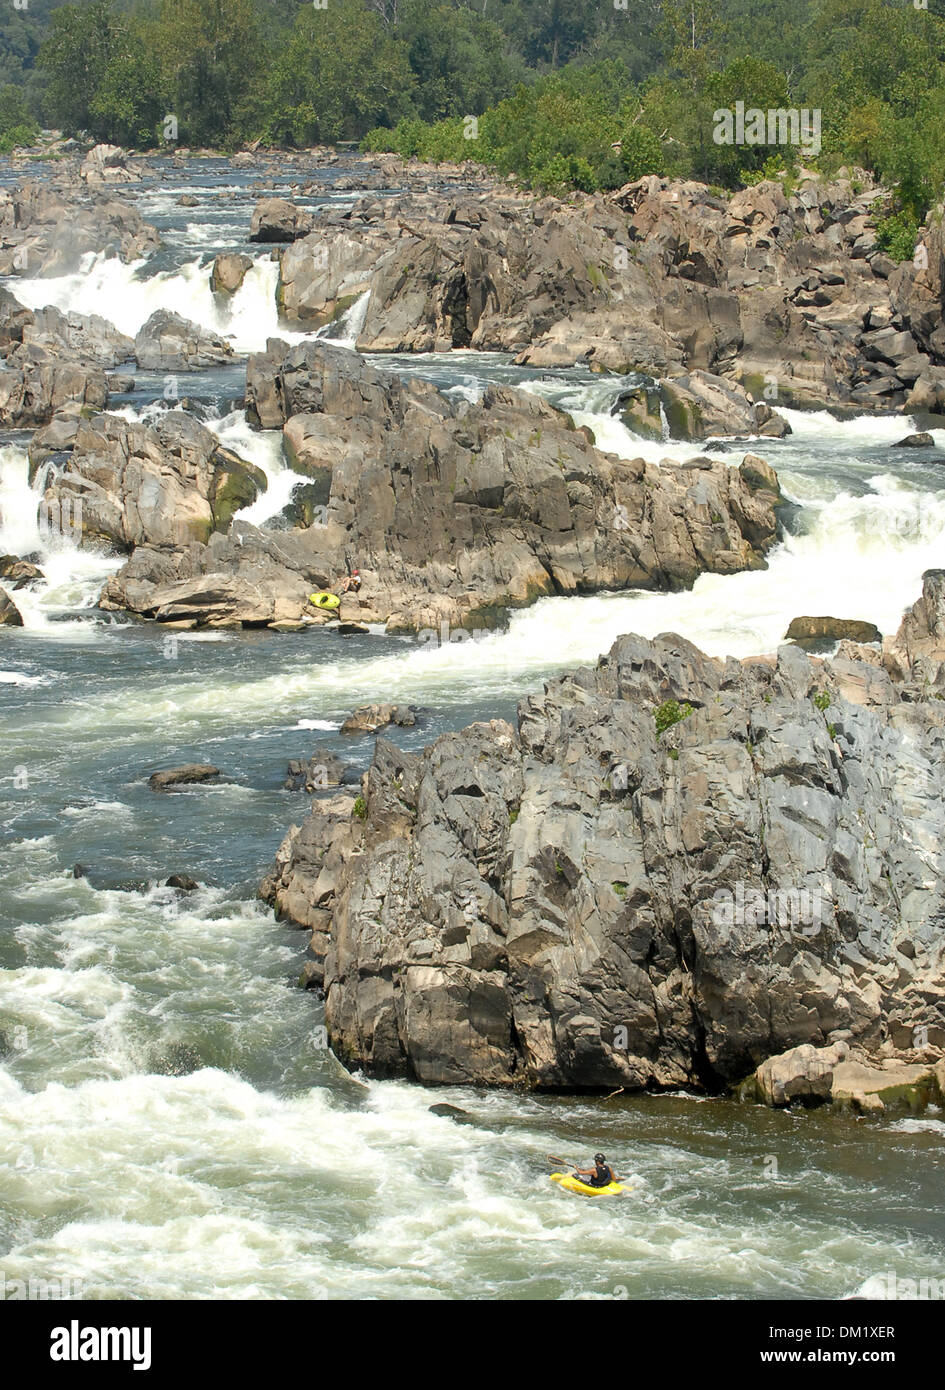 Great Falls Park Virginia on Potomac River flows over jagged rocks and builds up speed as it falls over series of rocks, Stock Photo